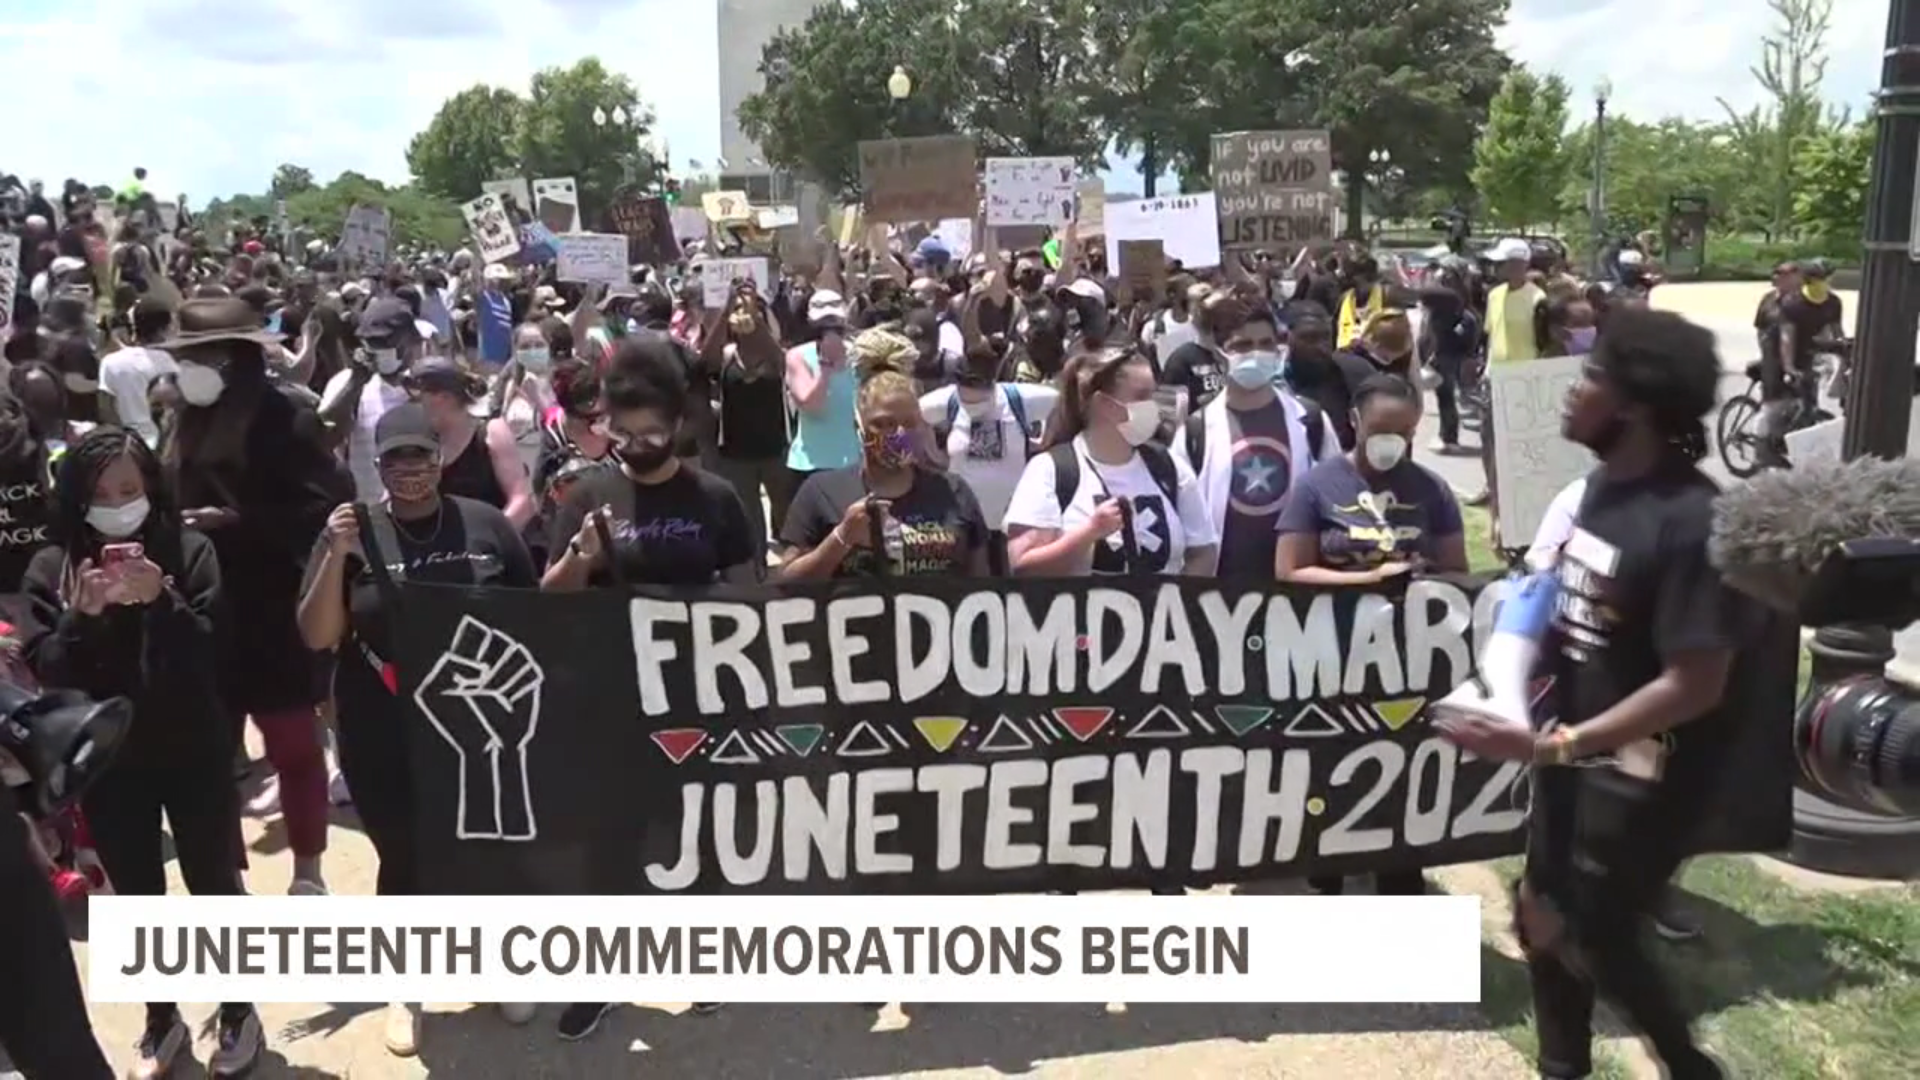 This act of kindness is a "build-up" into Juneteenth to remind everyone to give honor to those who have set a path to freedom